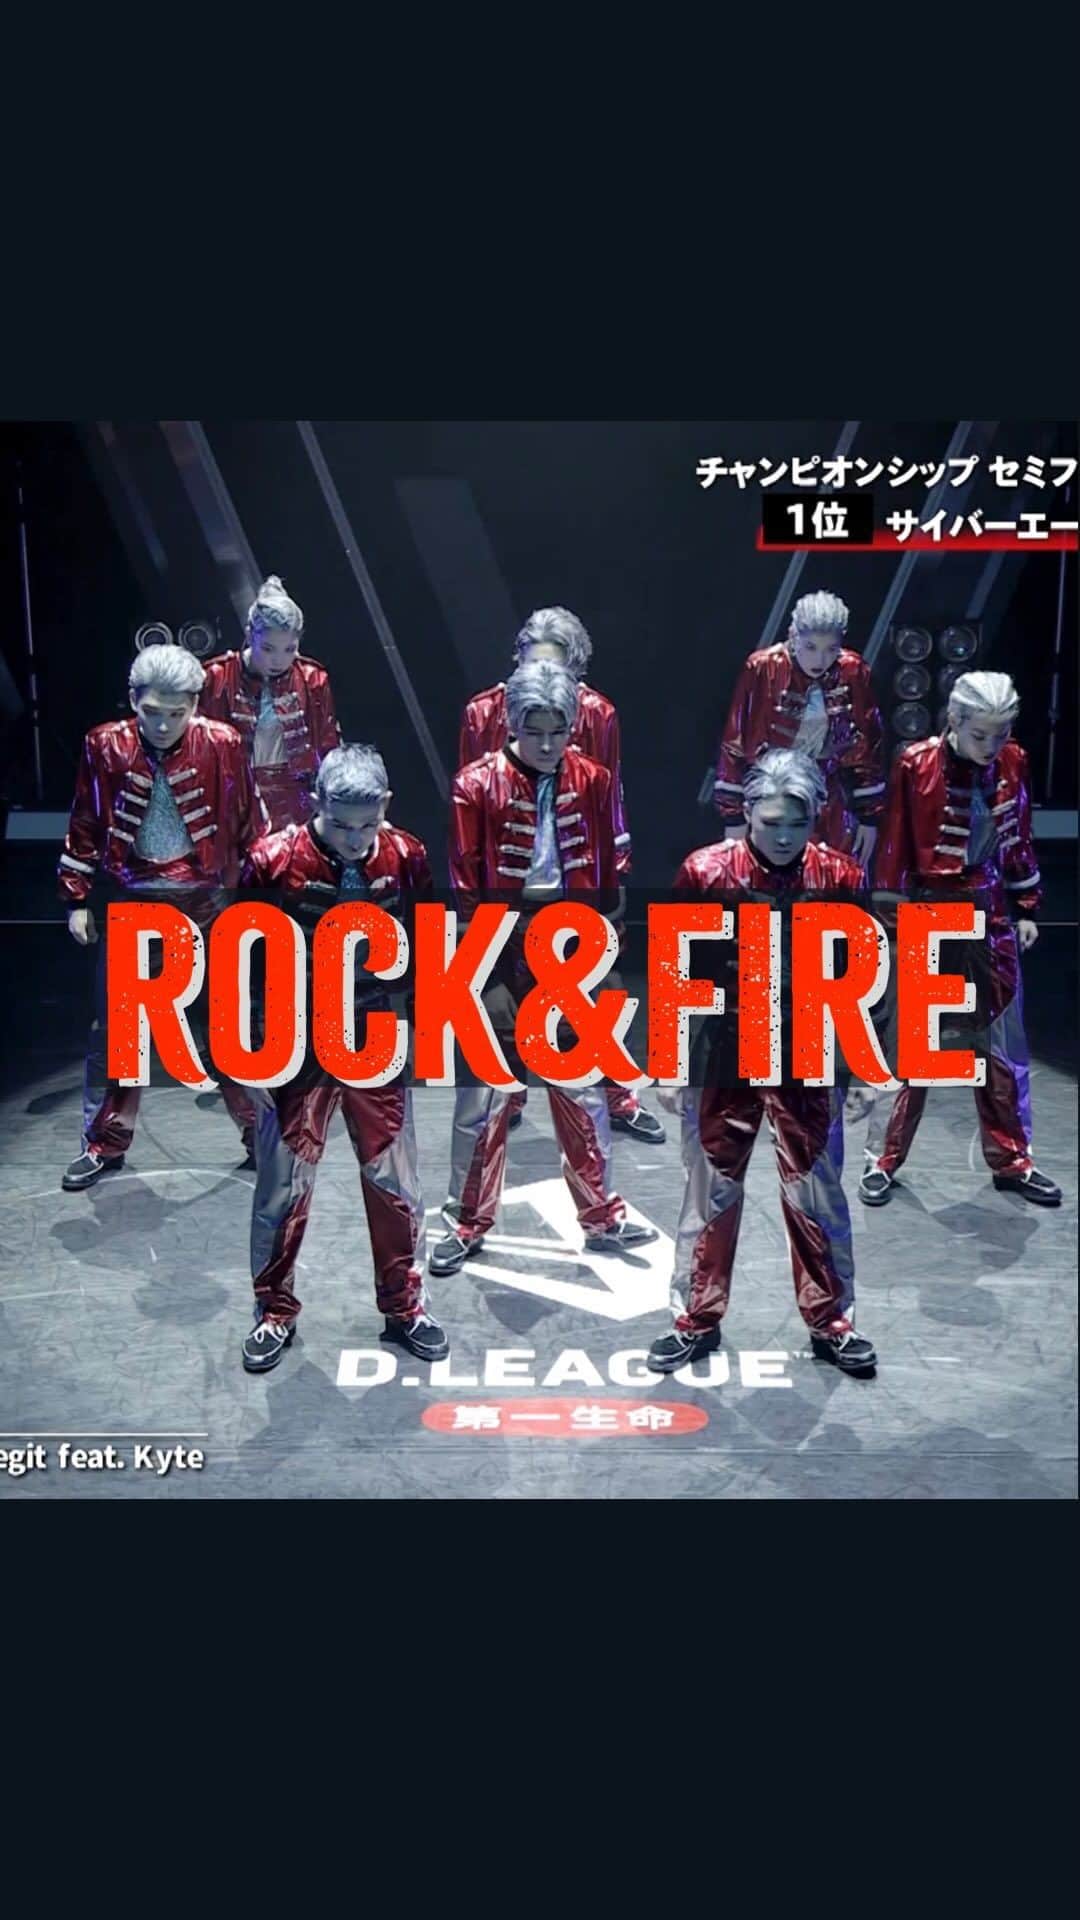 FISHBOYのインスタグラム：「“ROCK & FIRE” by @cyberagentlegit  Directed by @fishboydance  Choreo by  @beatelements_takumi @ena_lock @fishboydance @kai_bs.gp  @ato_kojima  @lilshowww   Music @kyte_xdmns  @fishboydance  Costume @mirachdesignworks   For @dleague_official 22-23 season  岩のように守り、火を以て制す。衣装、楽曲、振付全てに岩と火の質感を練り込んだような作品となりました。質感表現が見ていて気持ちいい。全編はプロフィールのリンクからご覧ください！  I expressed the texture of both rocks and fire. I would be delighted if the hardness of the rocks and the heat of the fire could be conveyed through the costumes, music, and choreography. Please take a look at the entire piece by clicking on the link in my profile.  #dance #dleague」